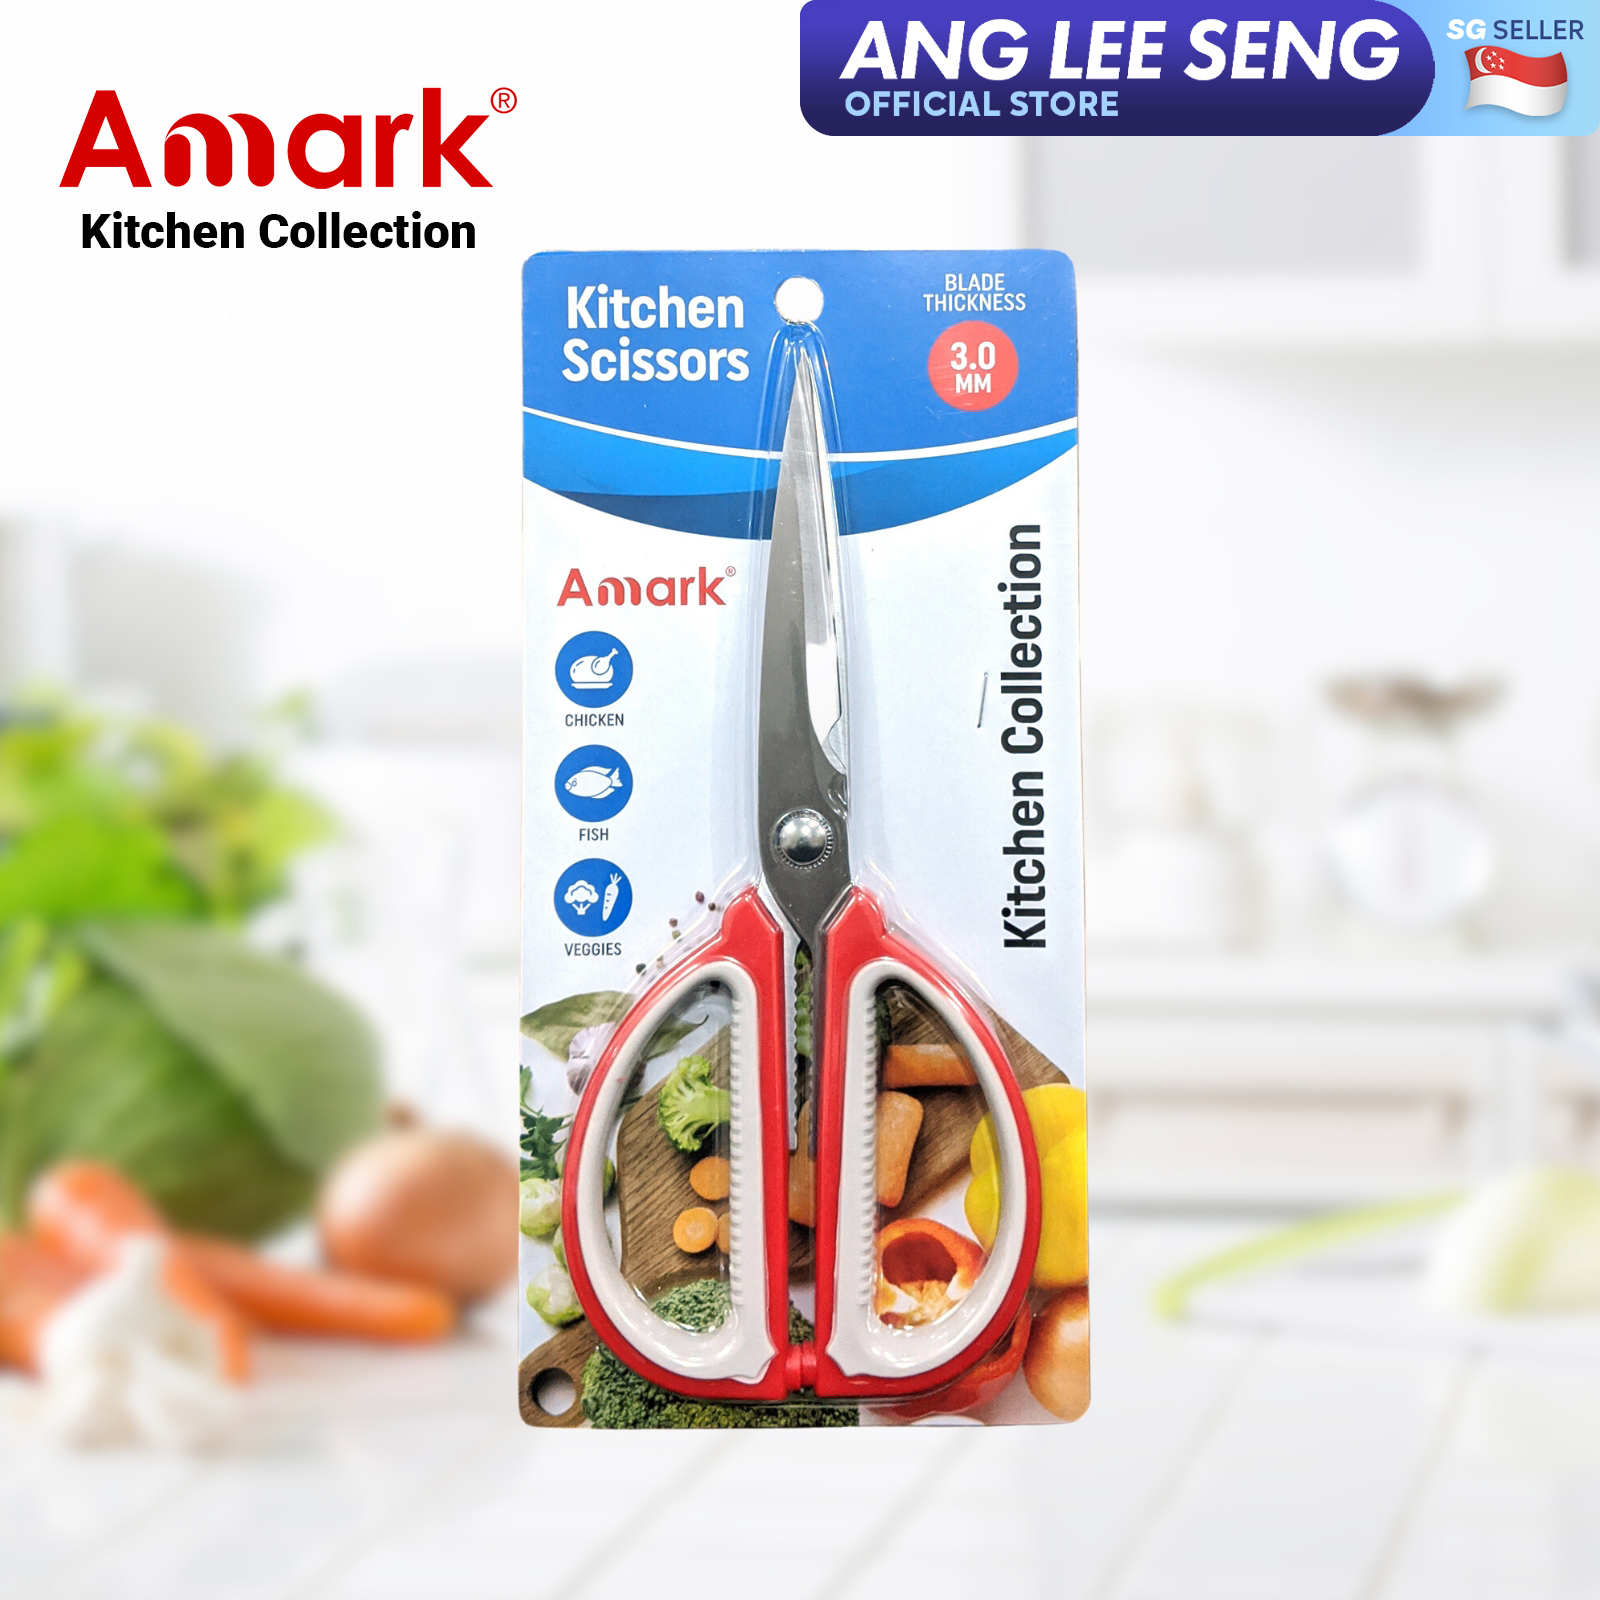 Amark Kitchen Collection Kitchen Scissors - For Cutting Meats, Fish, Vegetables & General Home, Hobby Use